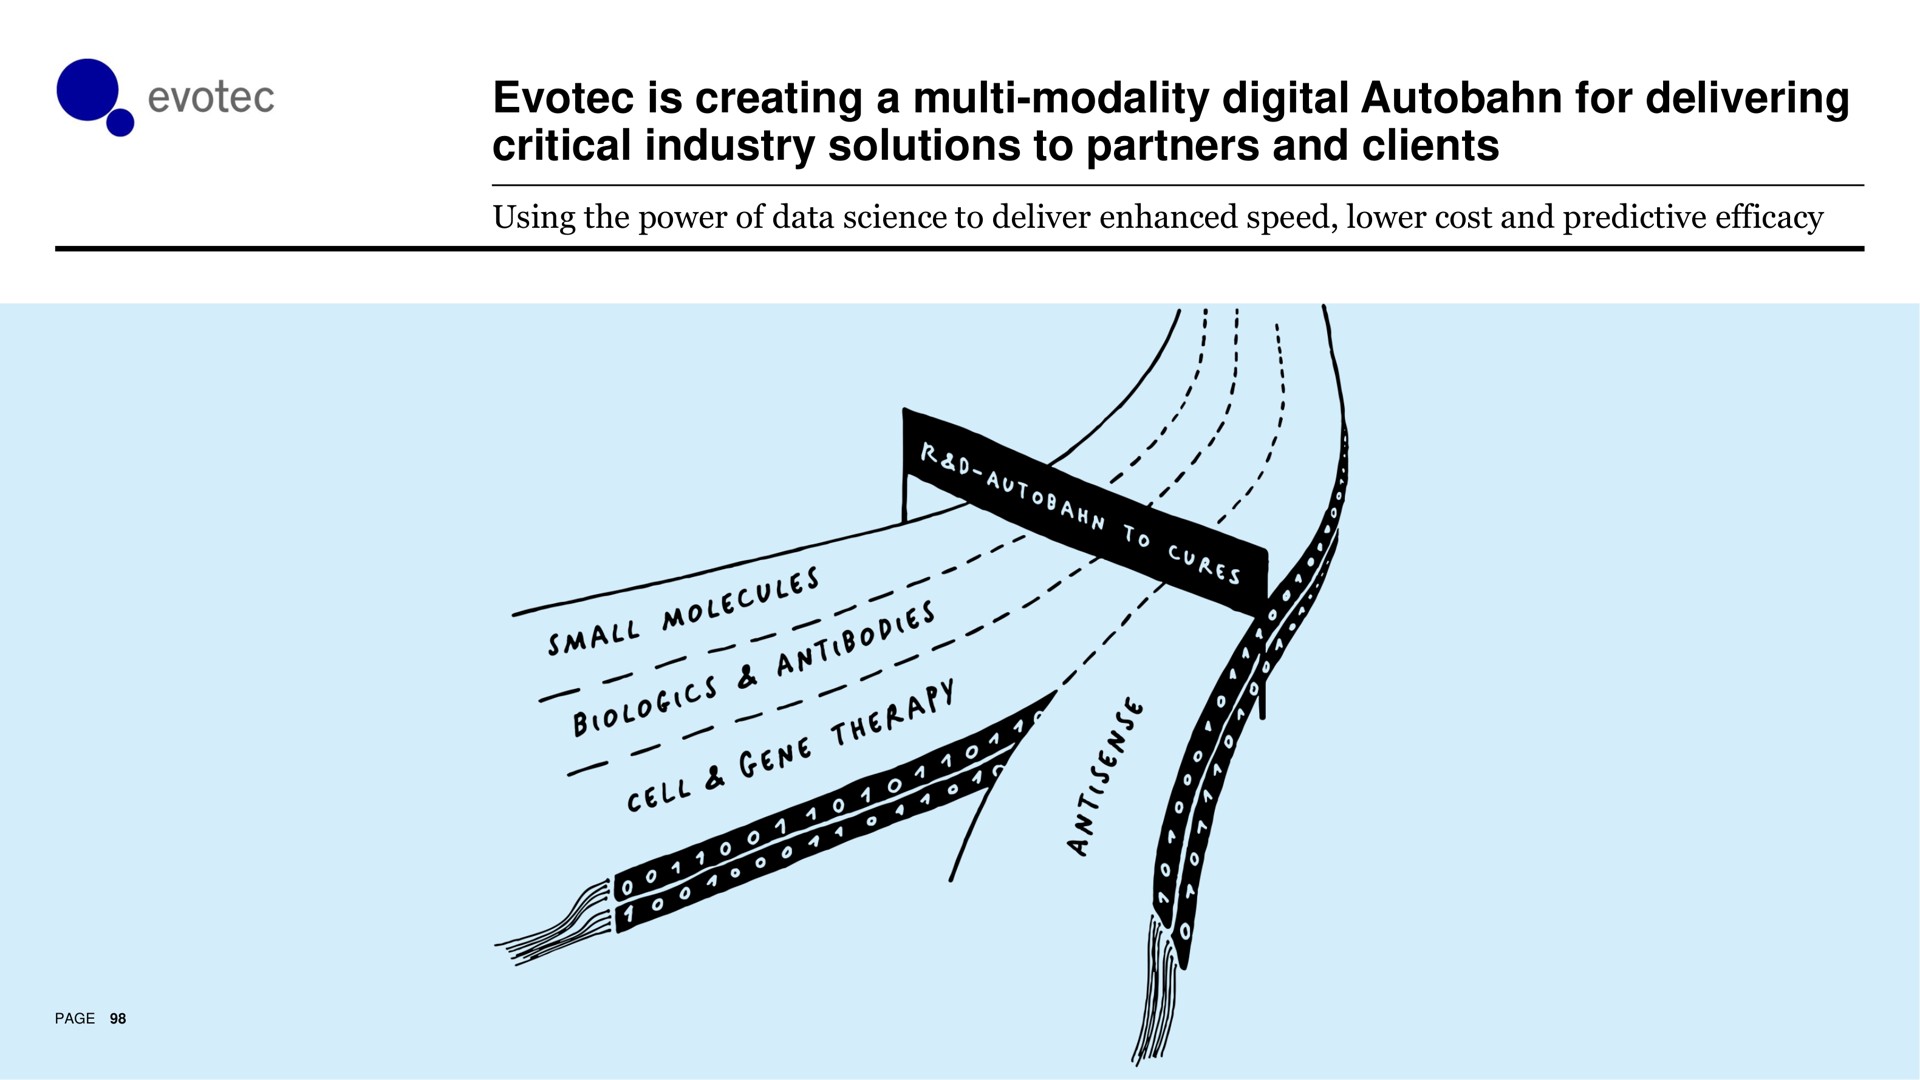 is creating a modality digital autobahn for delivering critical industry solutions to partners and clients | Evotec